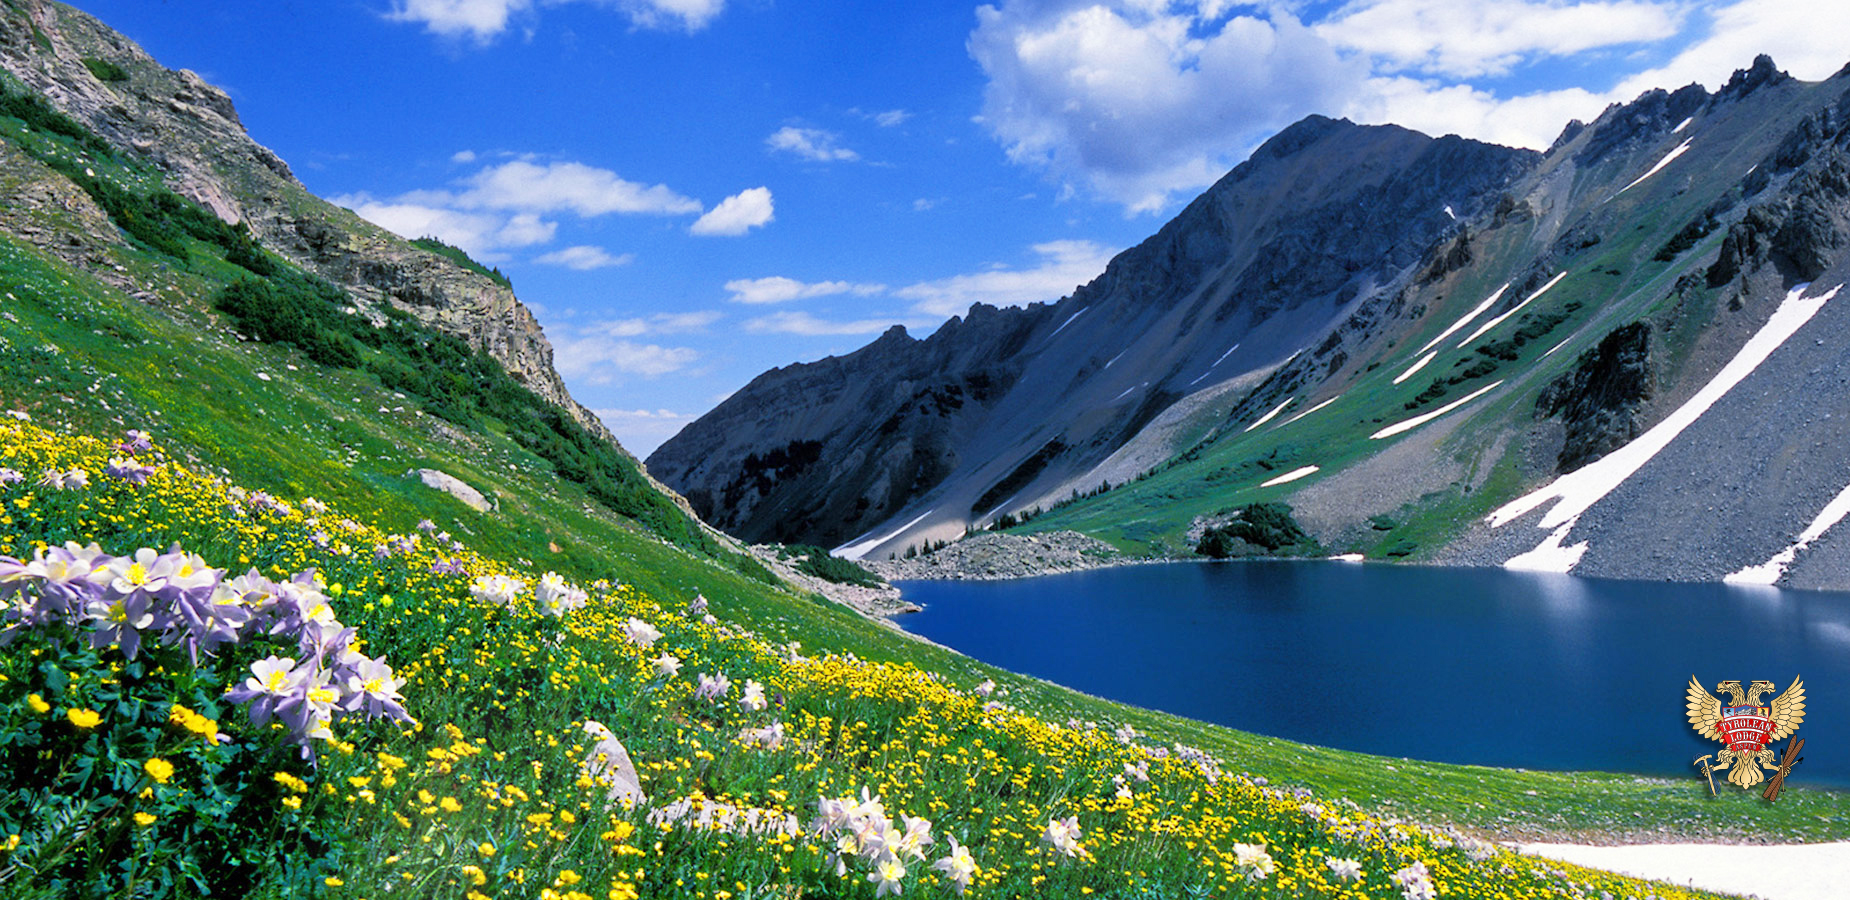 Alpine lakes and wildflowers astound even the seasoned hiker